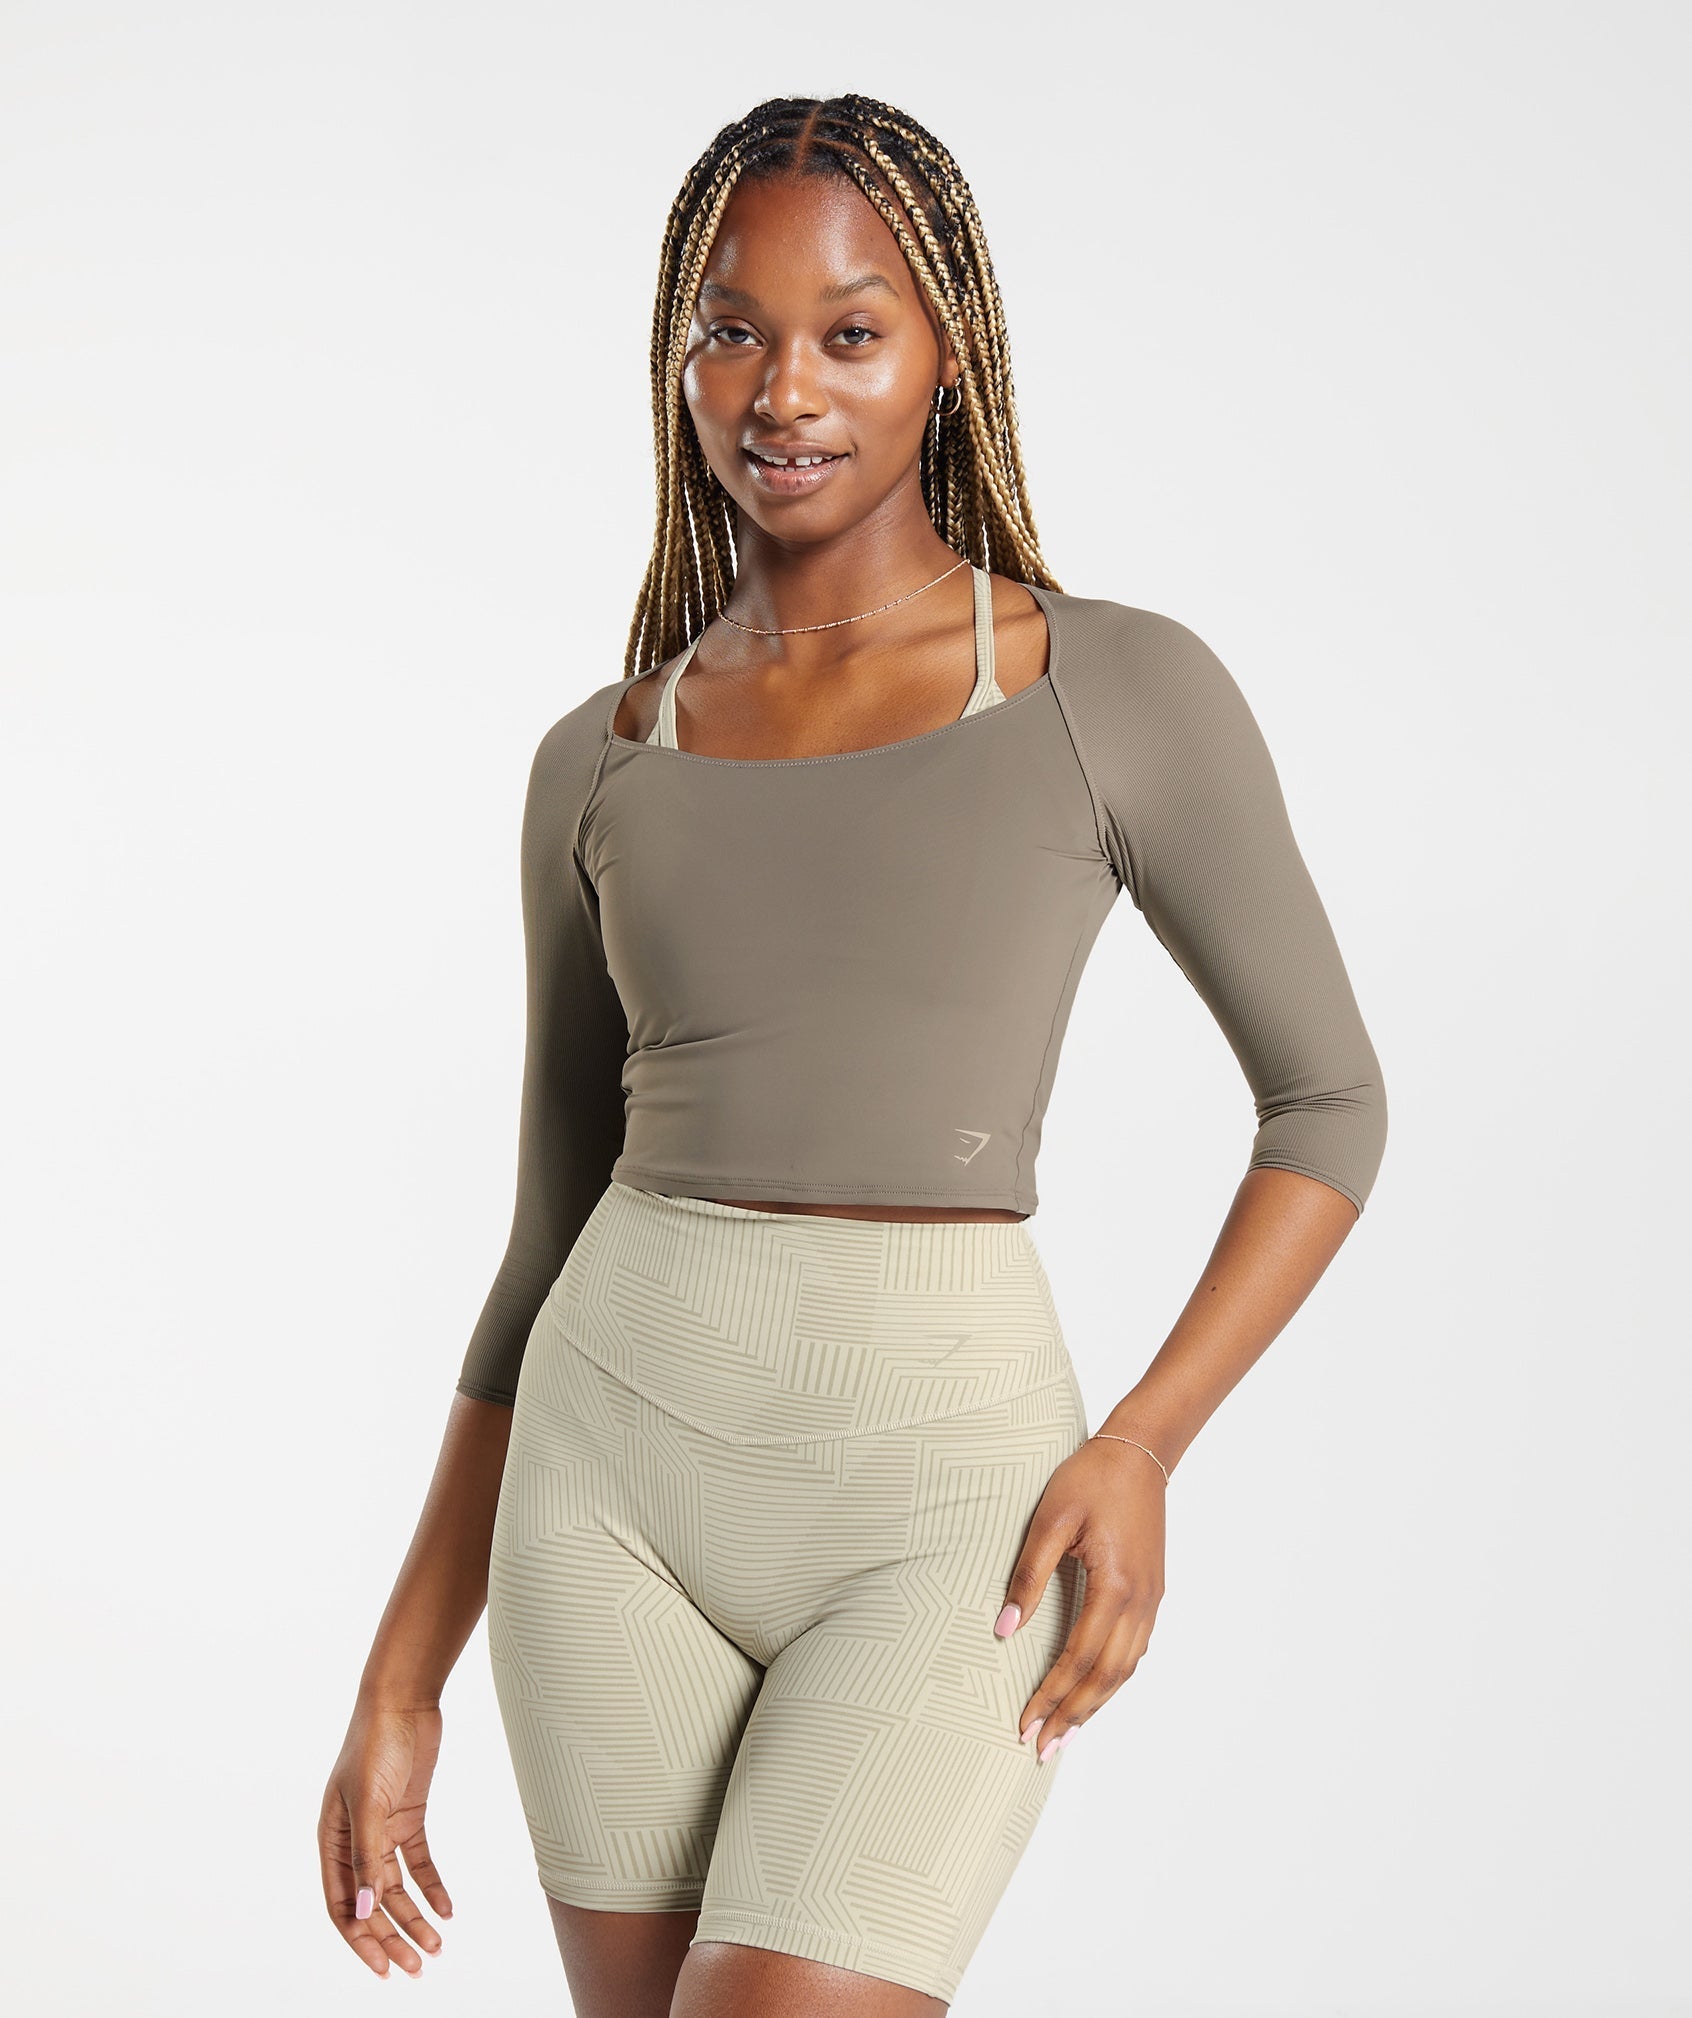 Elevate 3/4 Sleeve Crop Top in Brushed Brown is out of stock